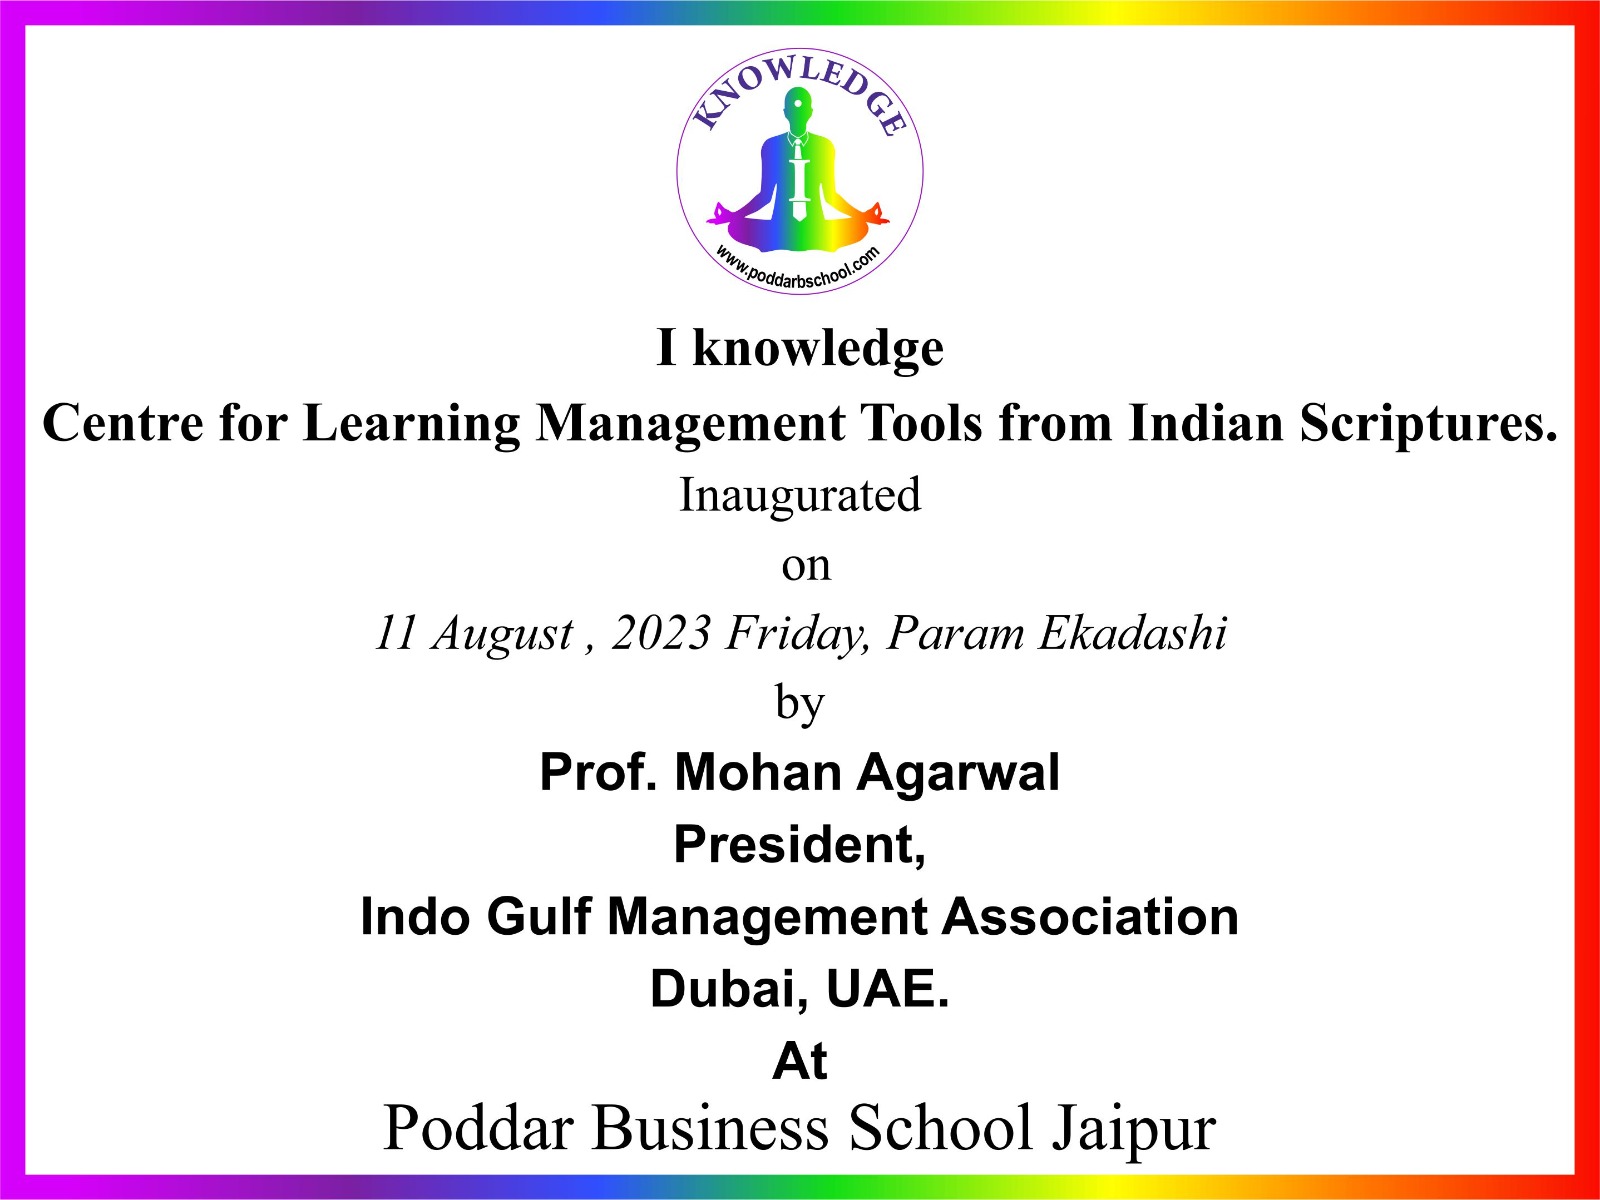 I Knowledge Center for Learning Management Tools From Indian Scriptures